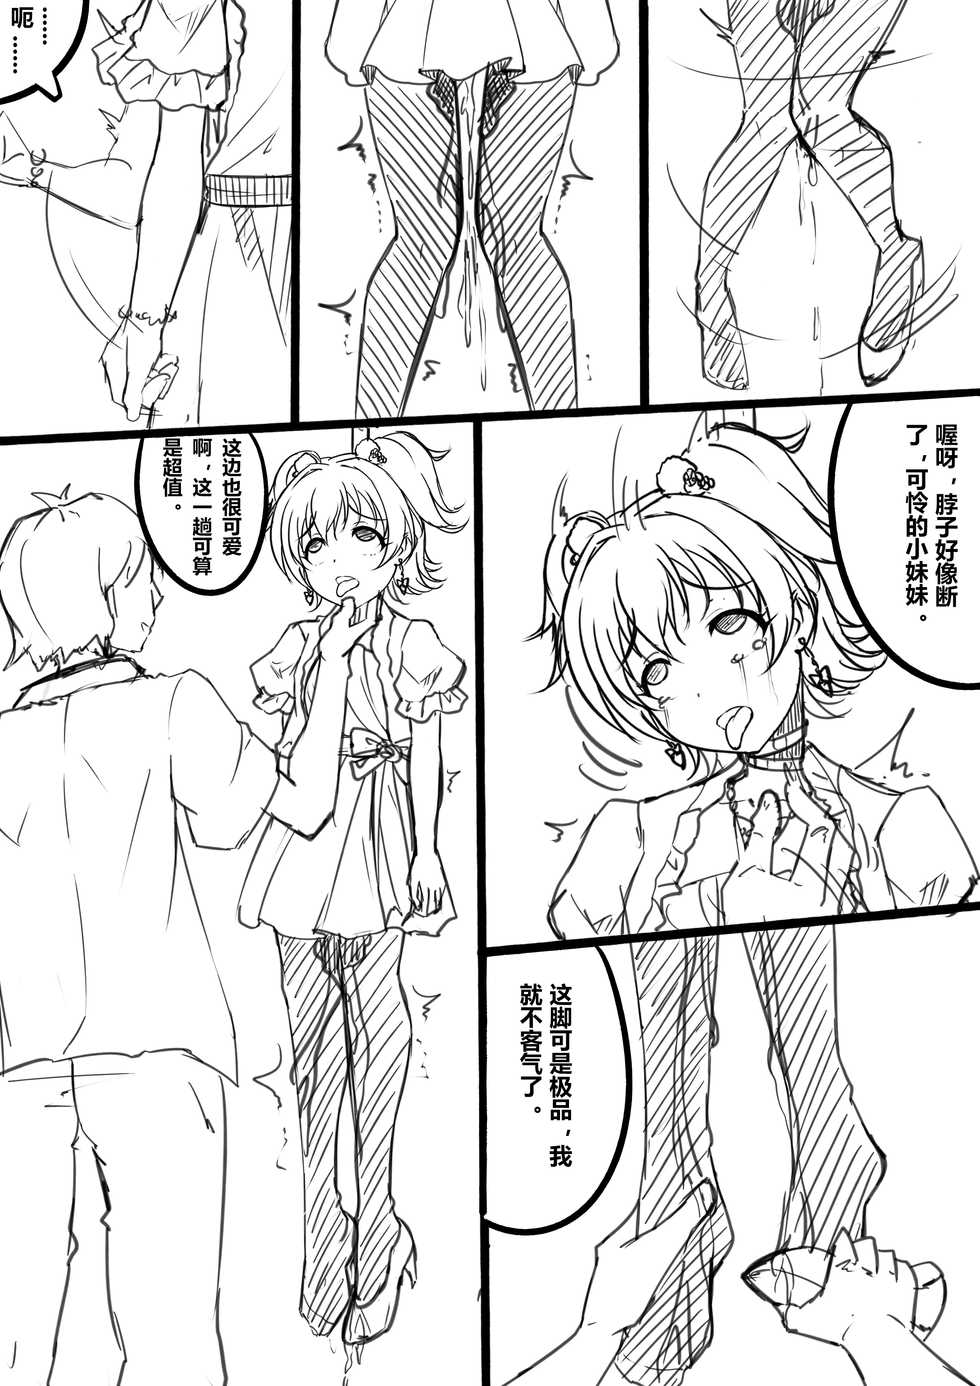 [Yandere no Hako] 【答謝特典】Kawaii make MY day! (THE IDOLM@STER MILLION LIVE!, THE iDOLM@STER CINDERELLA GIRLS) [Chinese] - Page 6